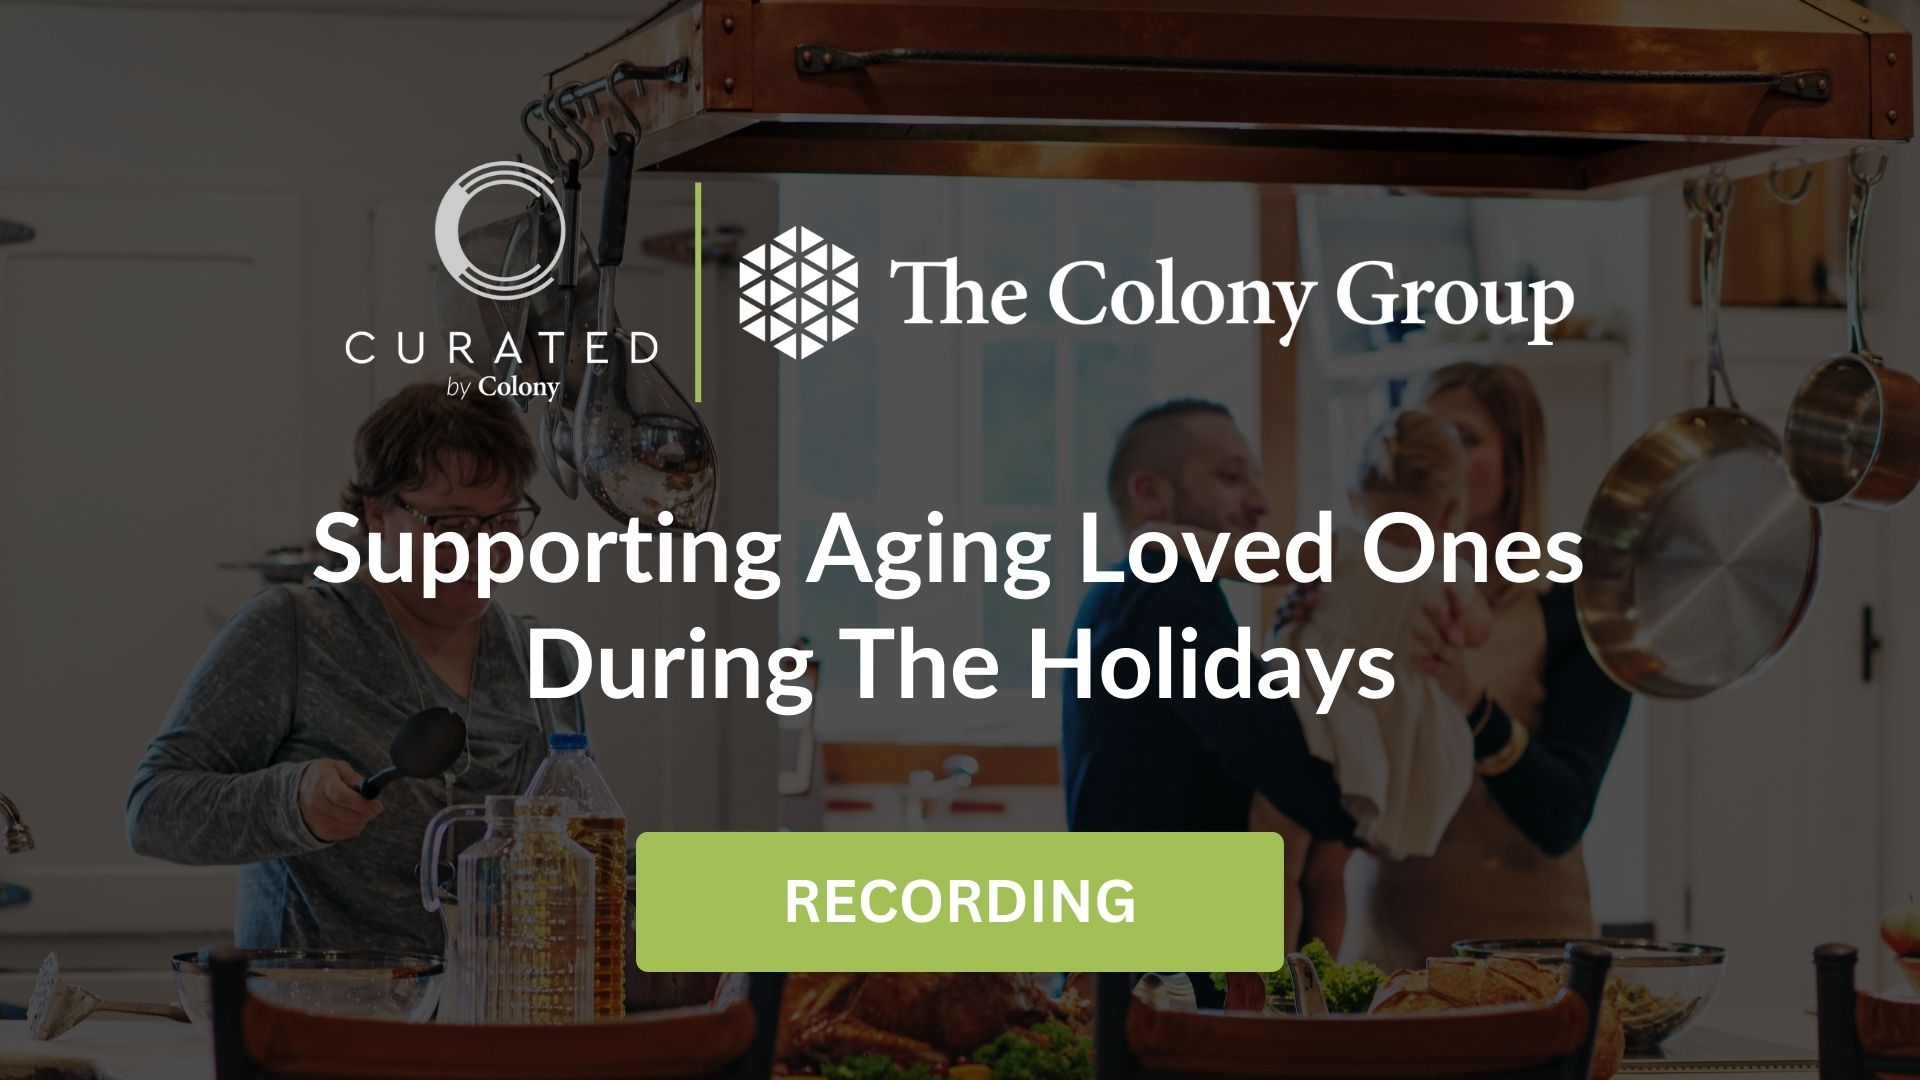 Curated by Colony Webinar Recording - Supporting Aging Loved Ones During Holidays